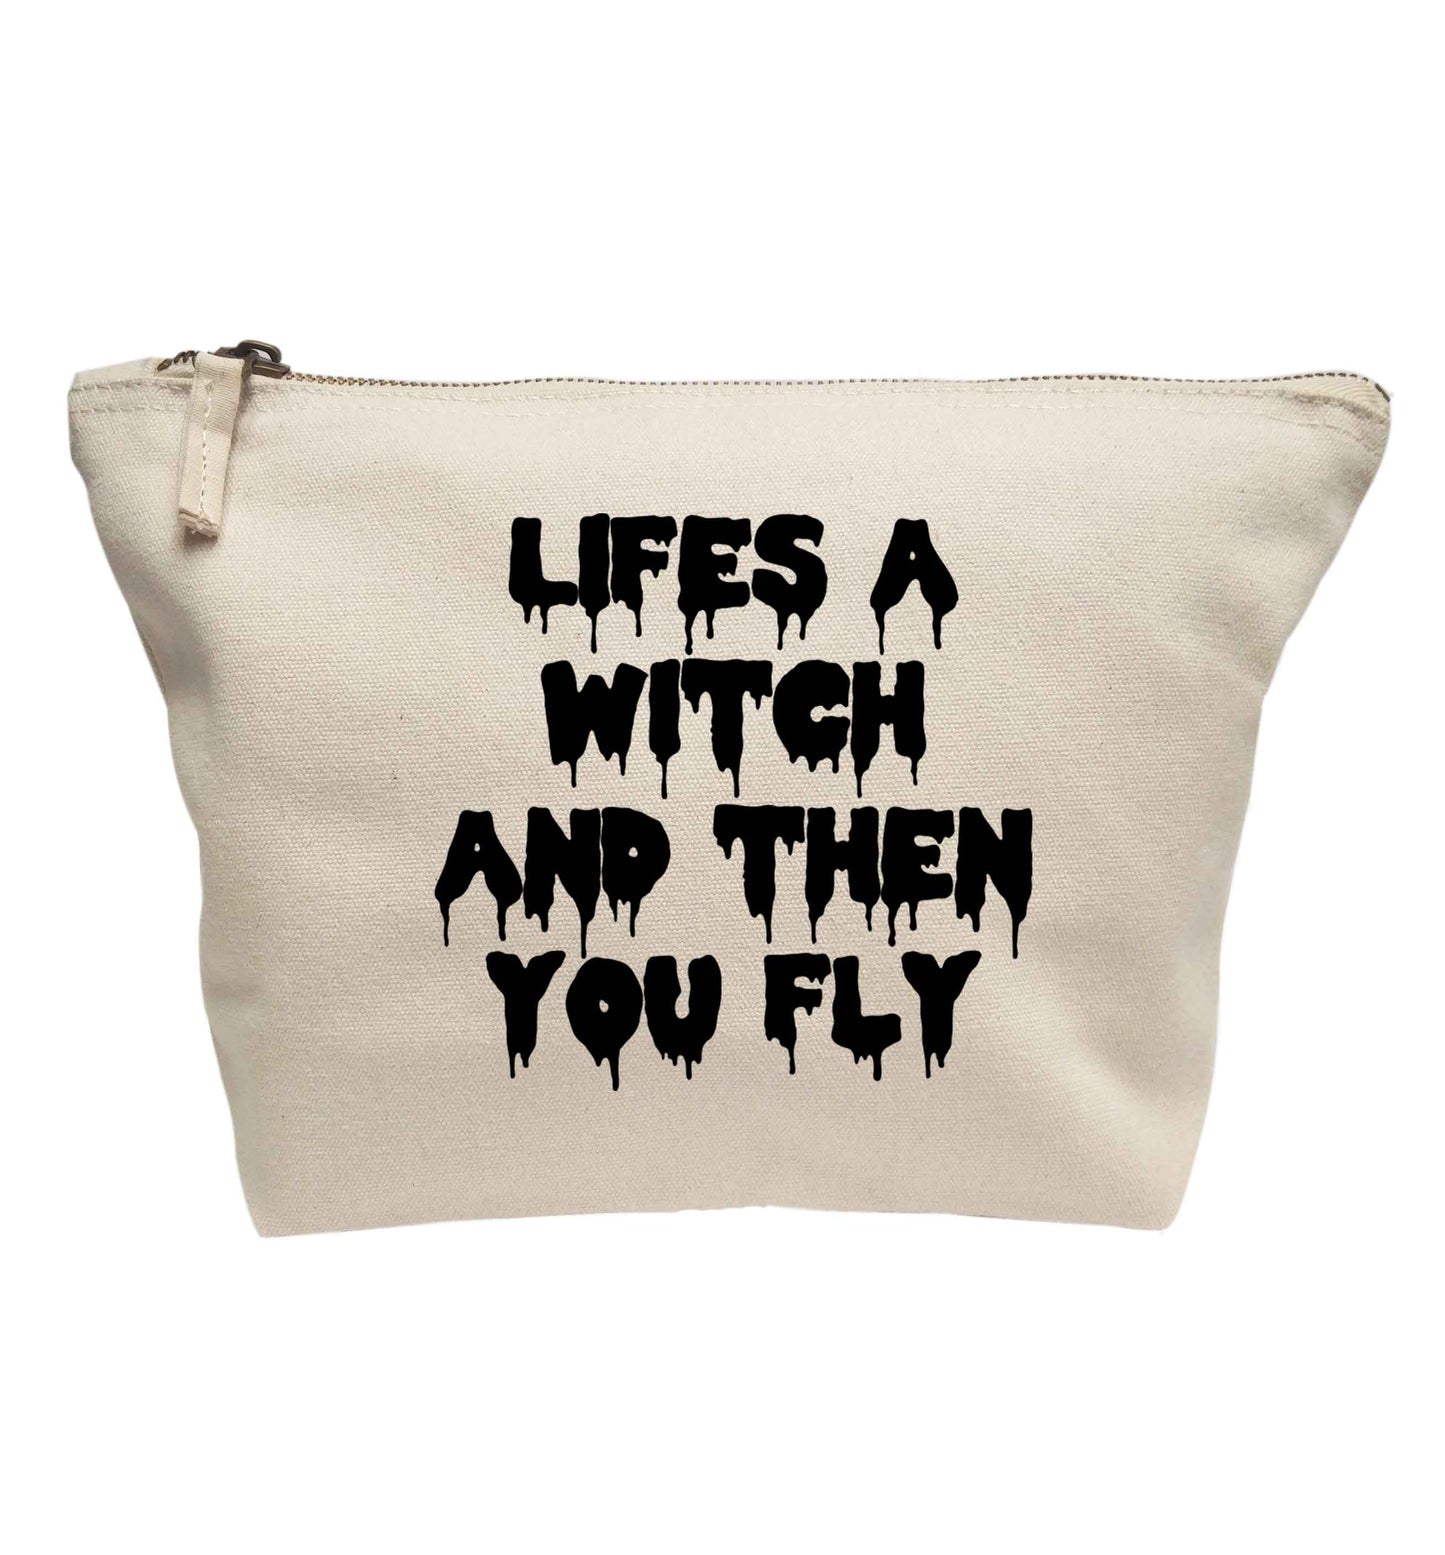 Life's a witch and then you fly | Makeup / wash bag